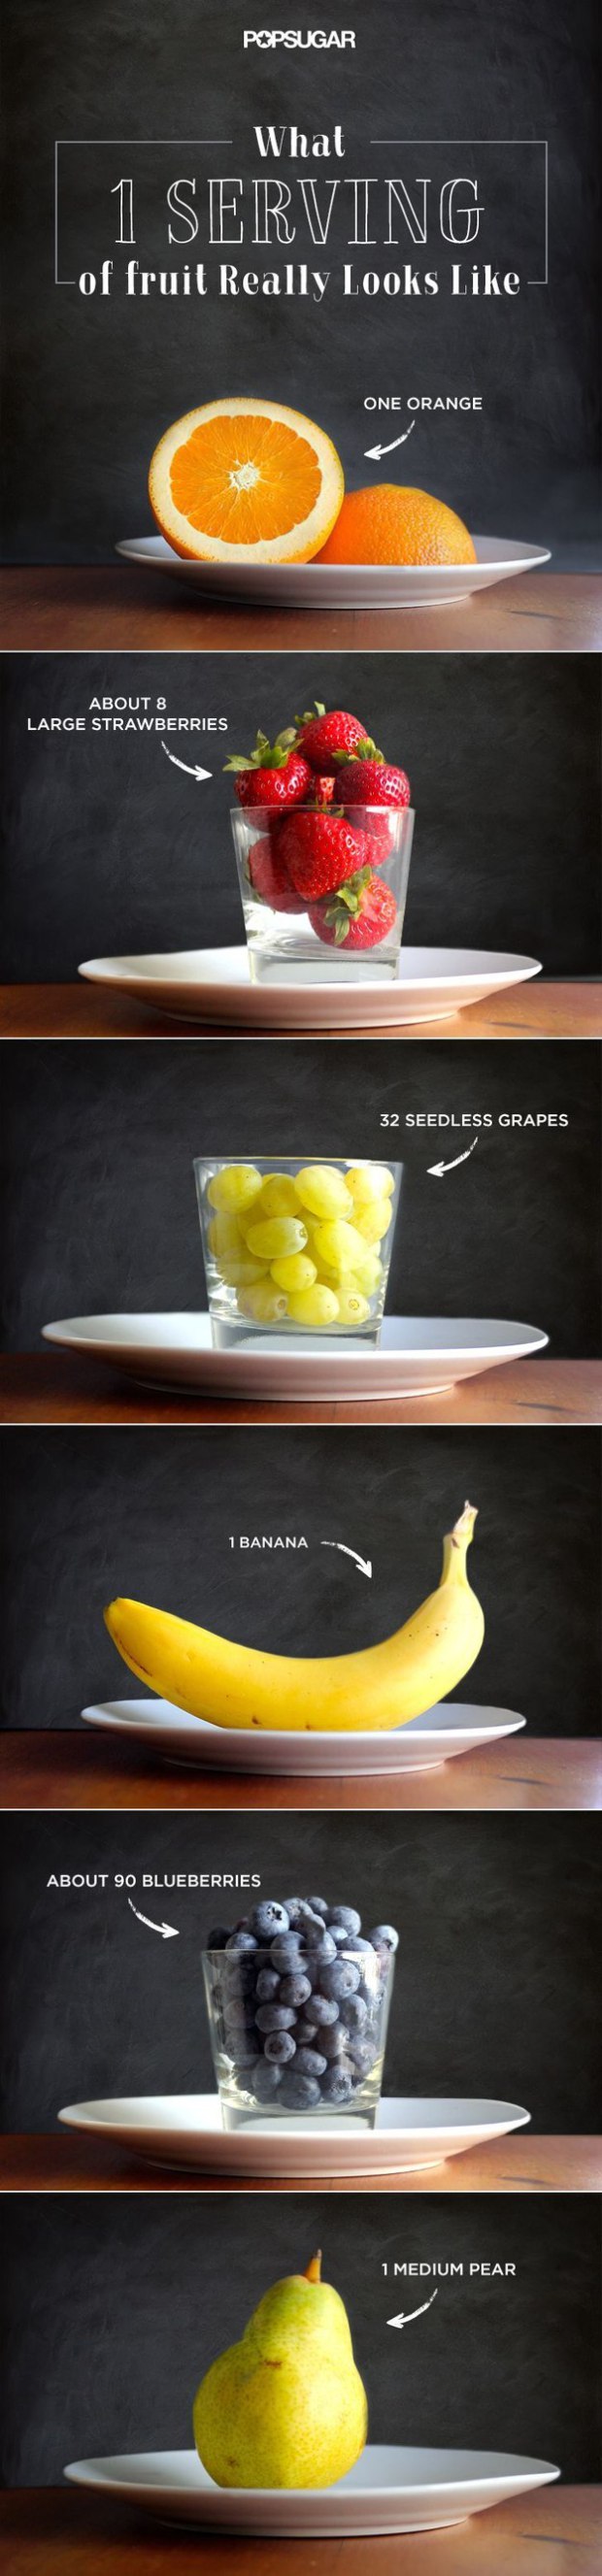 25 must-see diagrams that will make eating healthy super easy